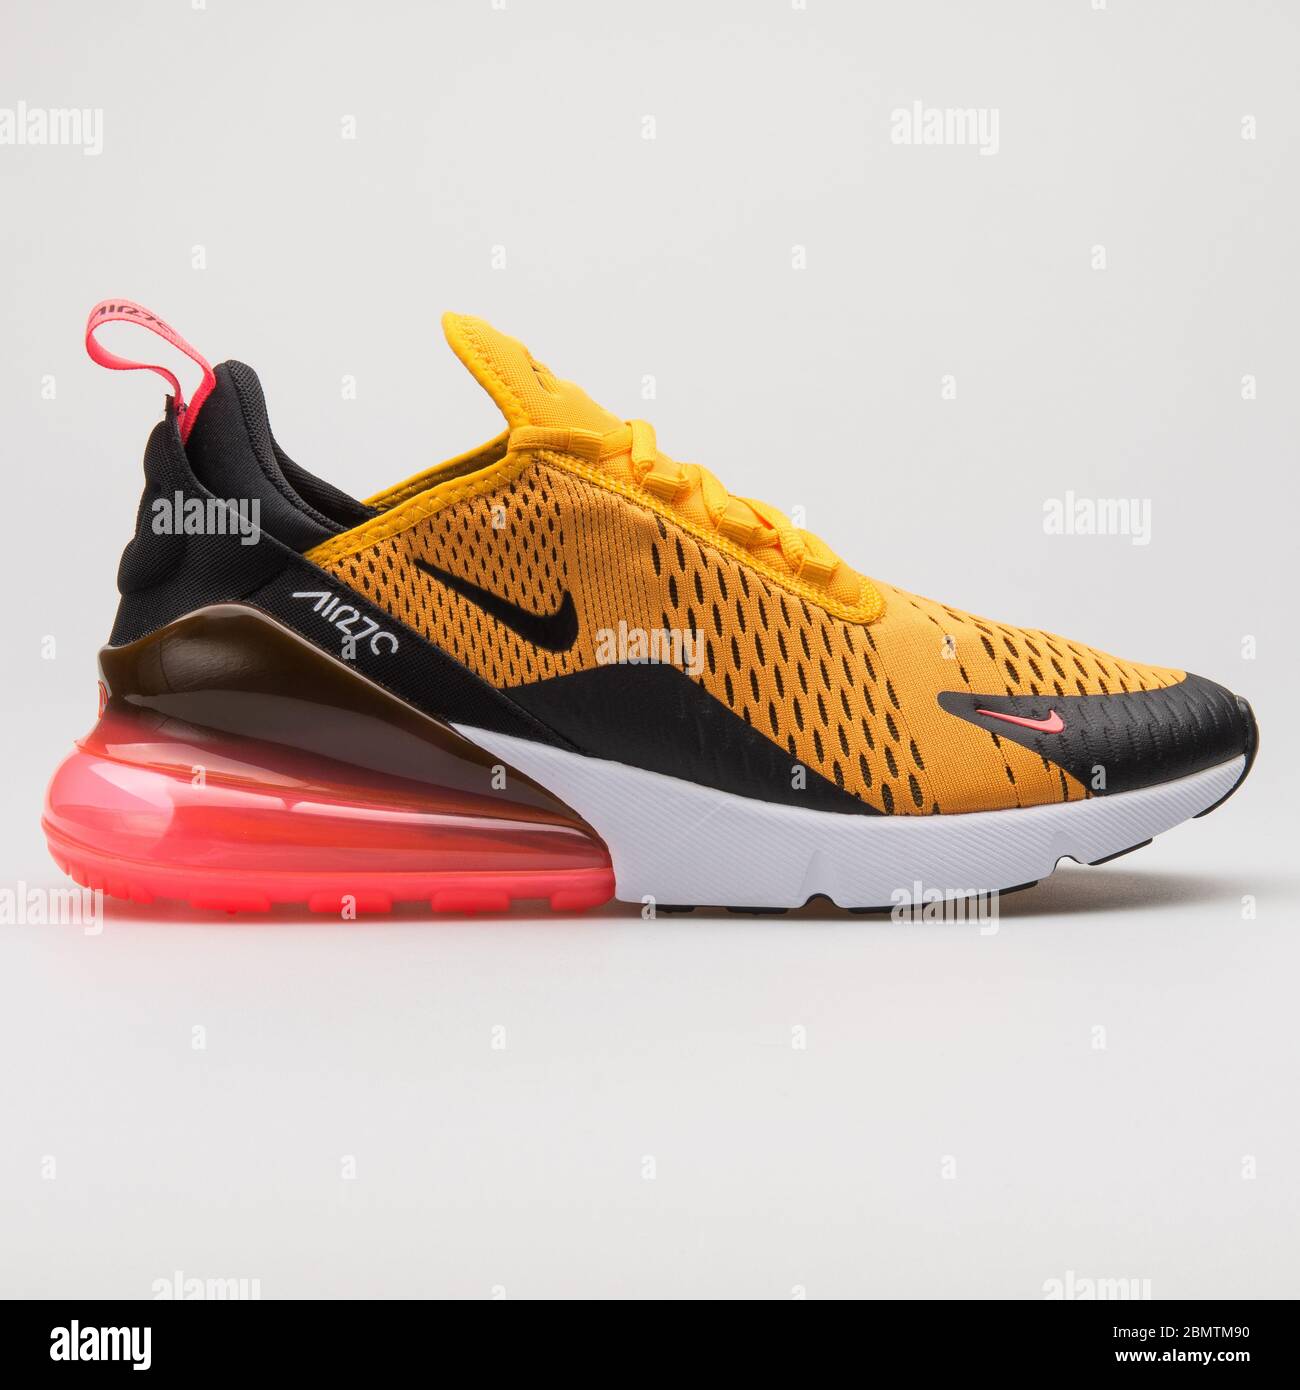 VIENNA, AUSTRIA - FEBRUARY 19, 2018: Nike Air Max 270 black, gold and red  sneaker on white background Stock Photo - Alamy